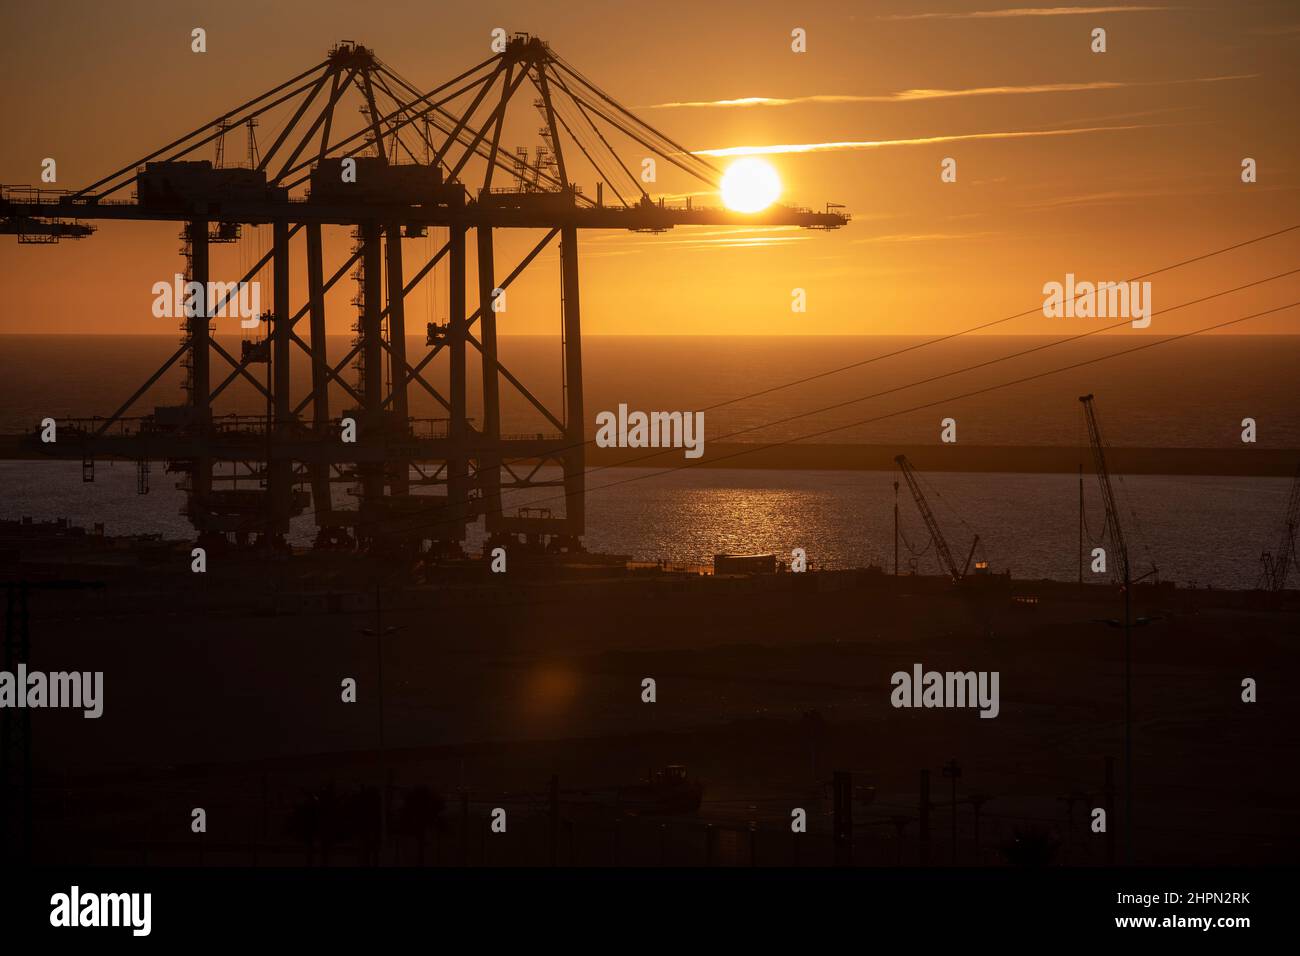 Ship-to-shore container cranes stand ready to handle port cargo at Tanger Med Port in Ksar es Seghir, Morocco, North Africa. Stock Photo